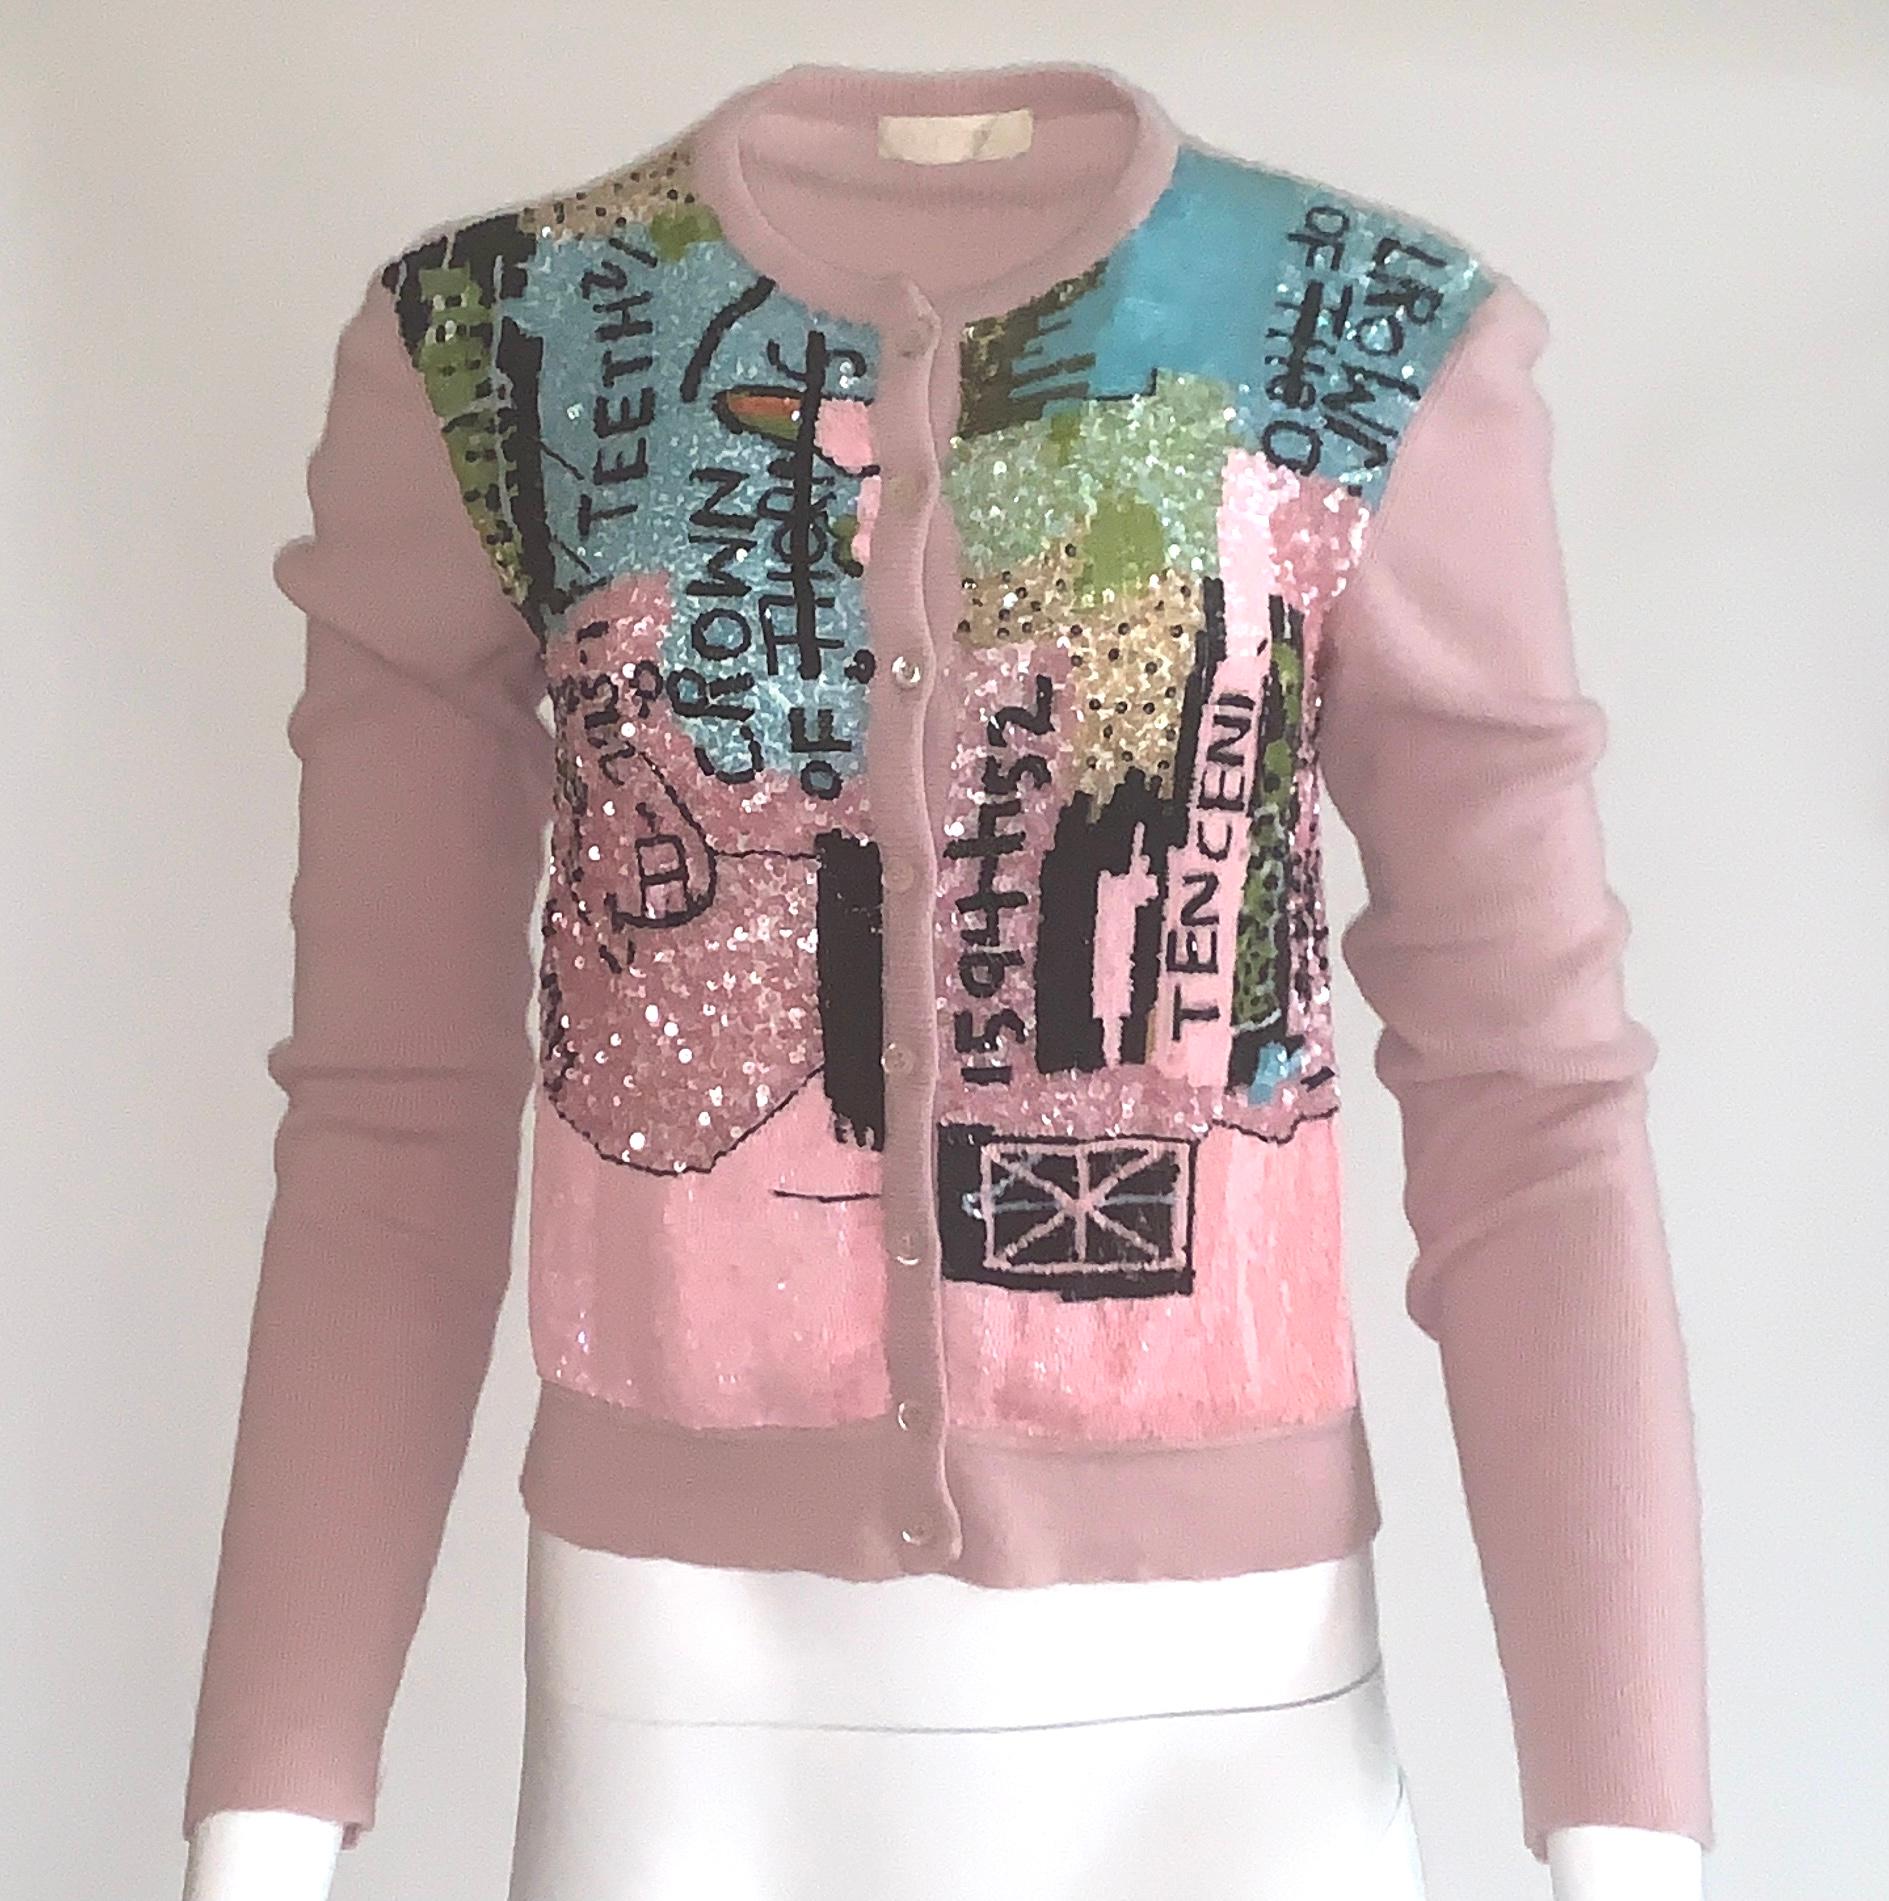 Amazing and rare mauve pink rib-knit wool-cashmere cardigan from the 2006 Valentino collection created with Basquiat prints. Front sweater is covered in pink, black, robin's egg and lime sequins creating an iconic Basquiat work. Long sleeve, button